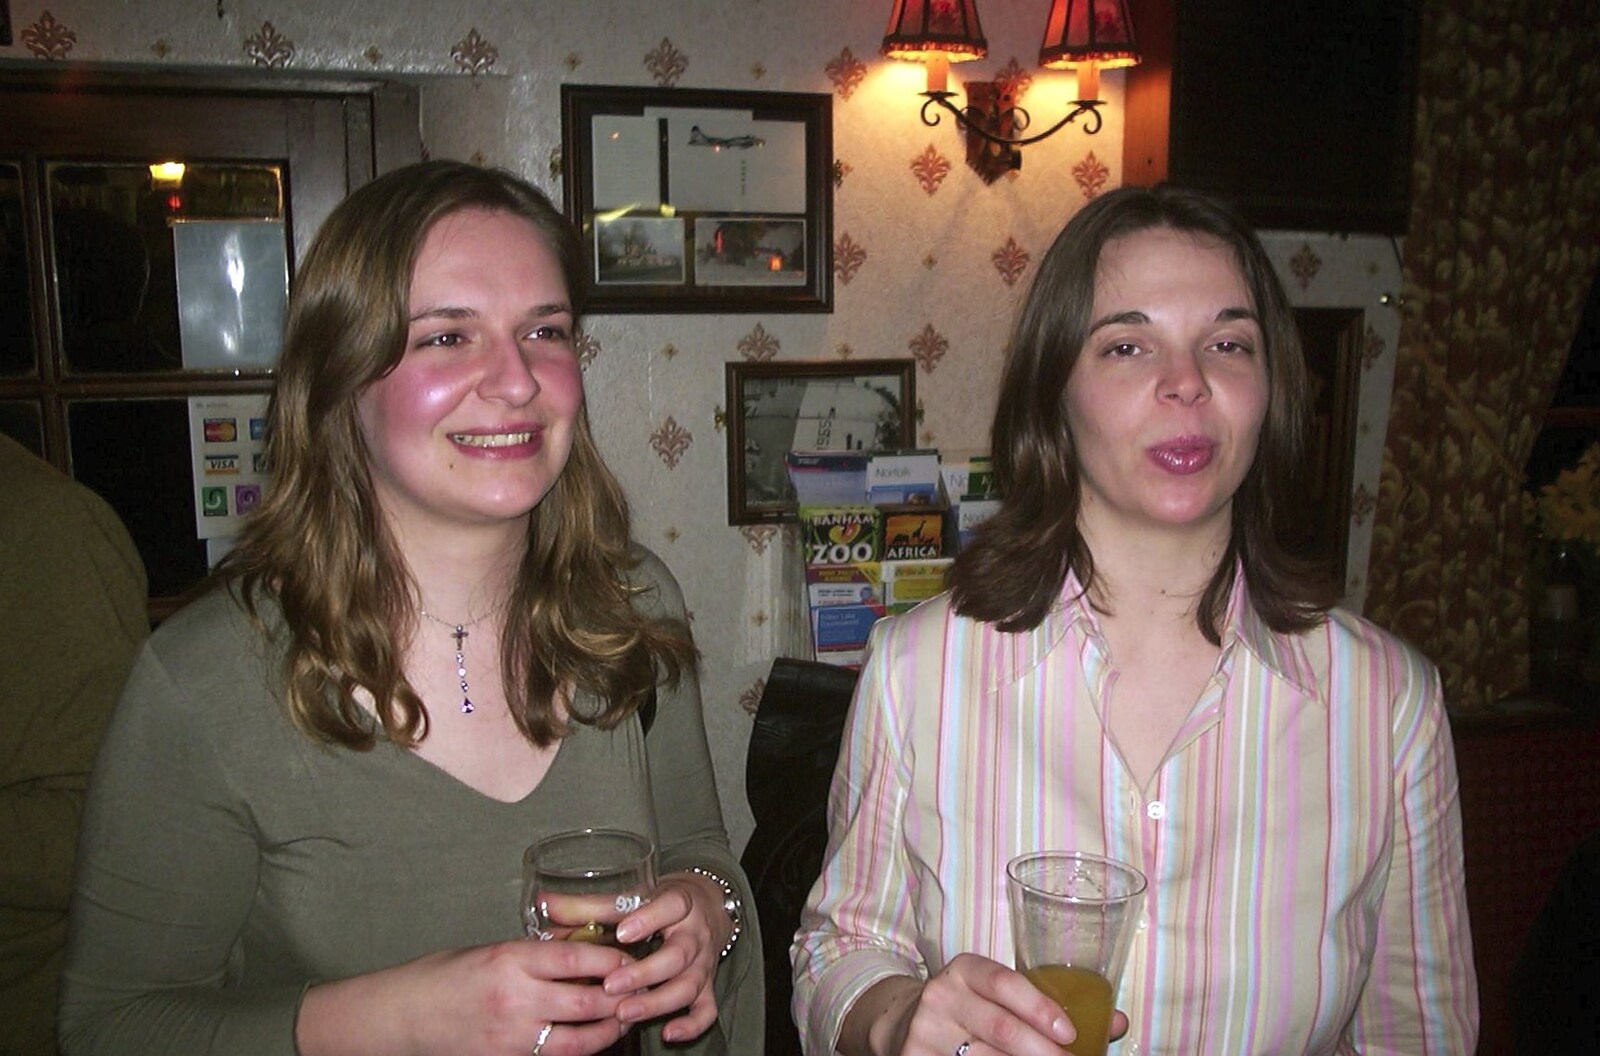 Paul and Claire's Engagement Party, Brome Swan, Suffolk - 27th March 2004: Jess and Jen